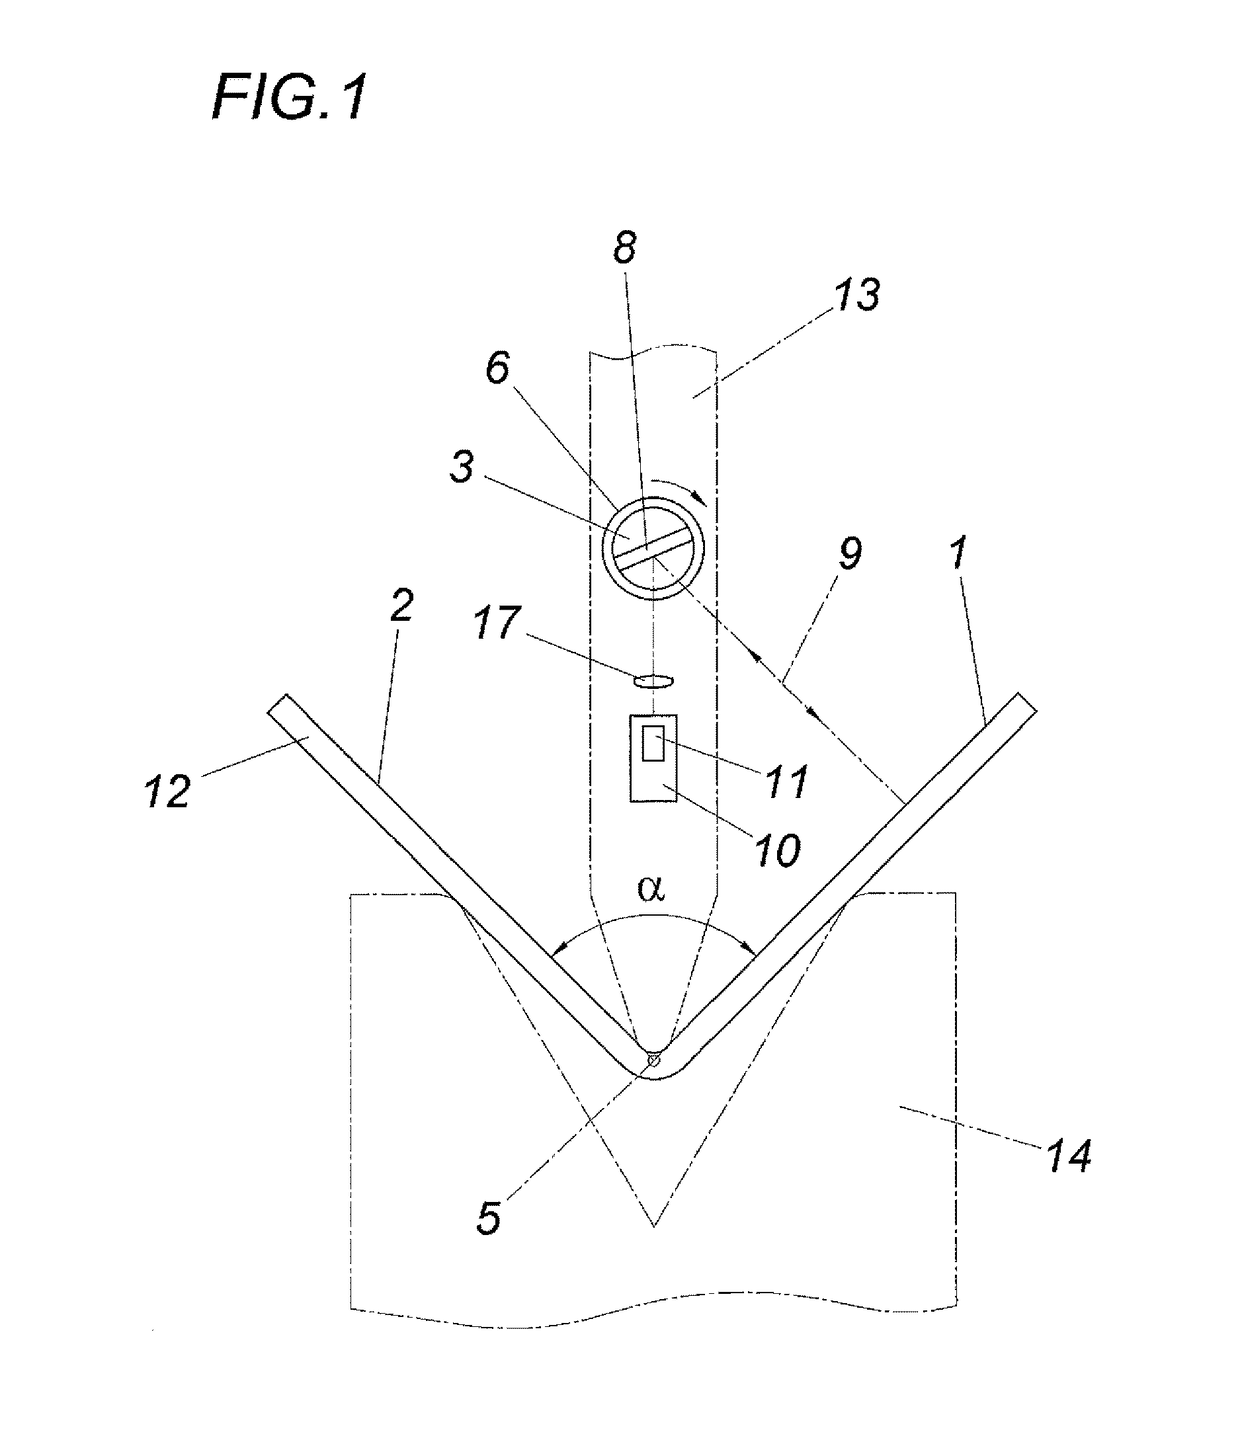 Apparatus for determining the angle between two planar workpiece surfaces